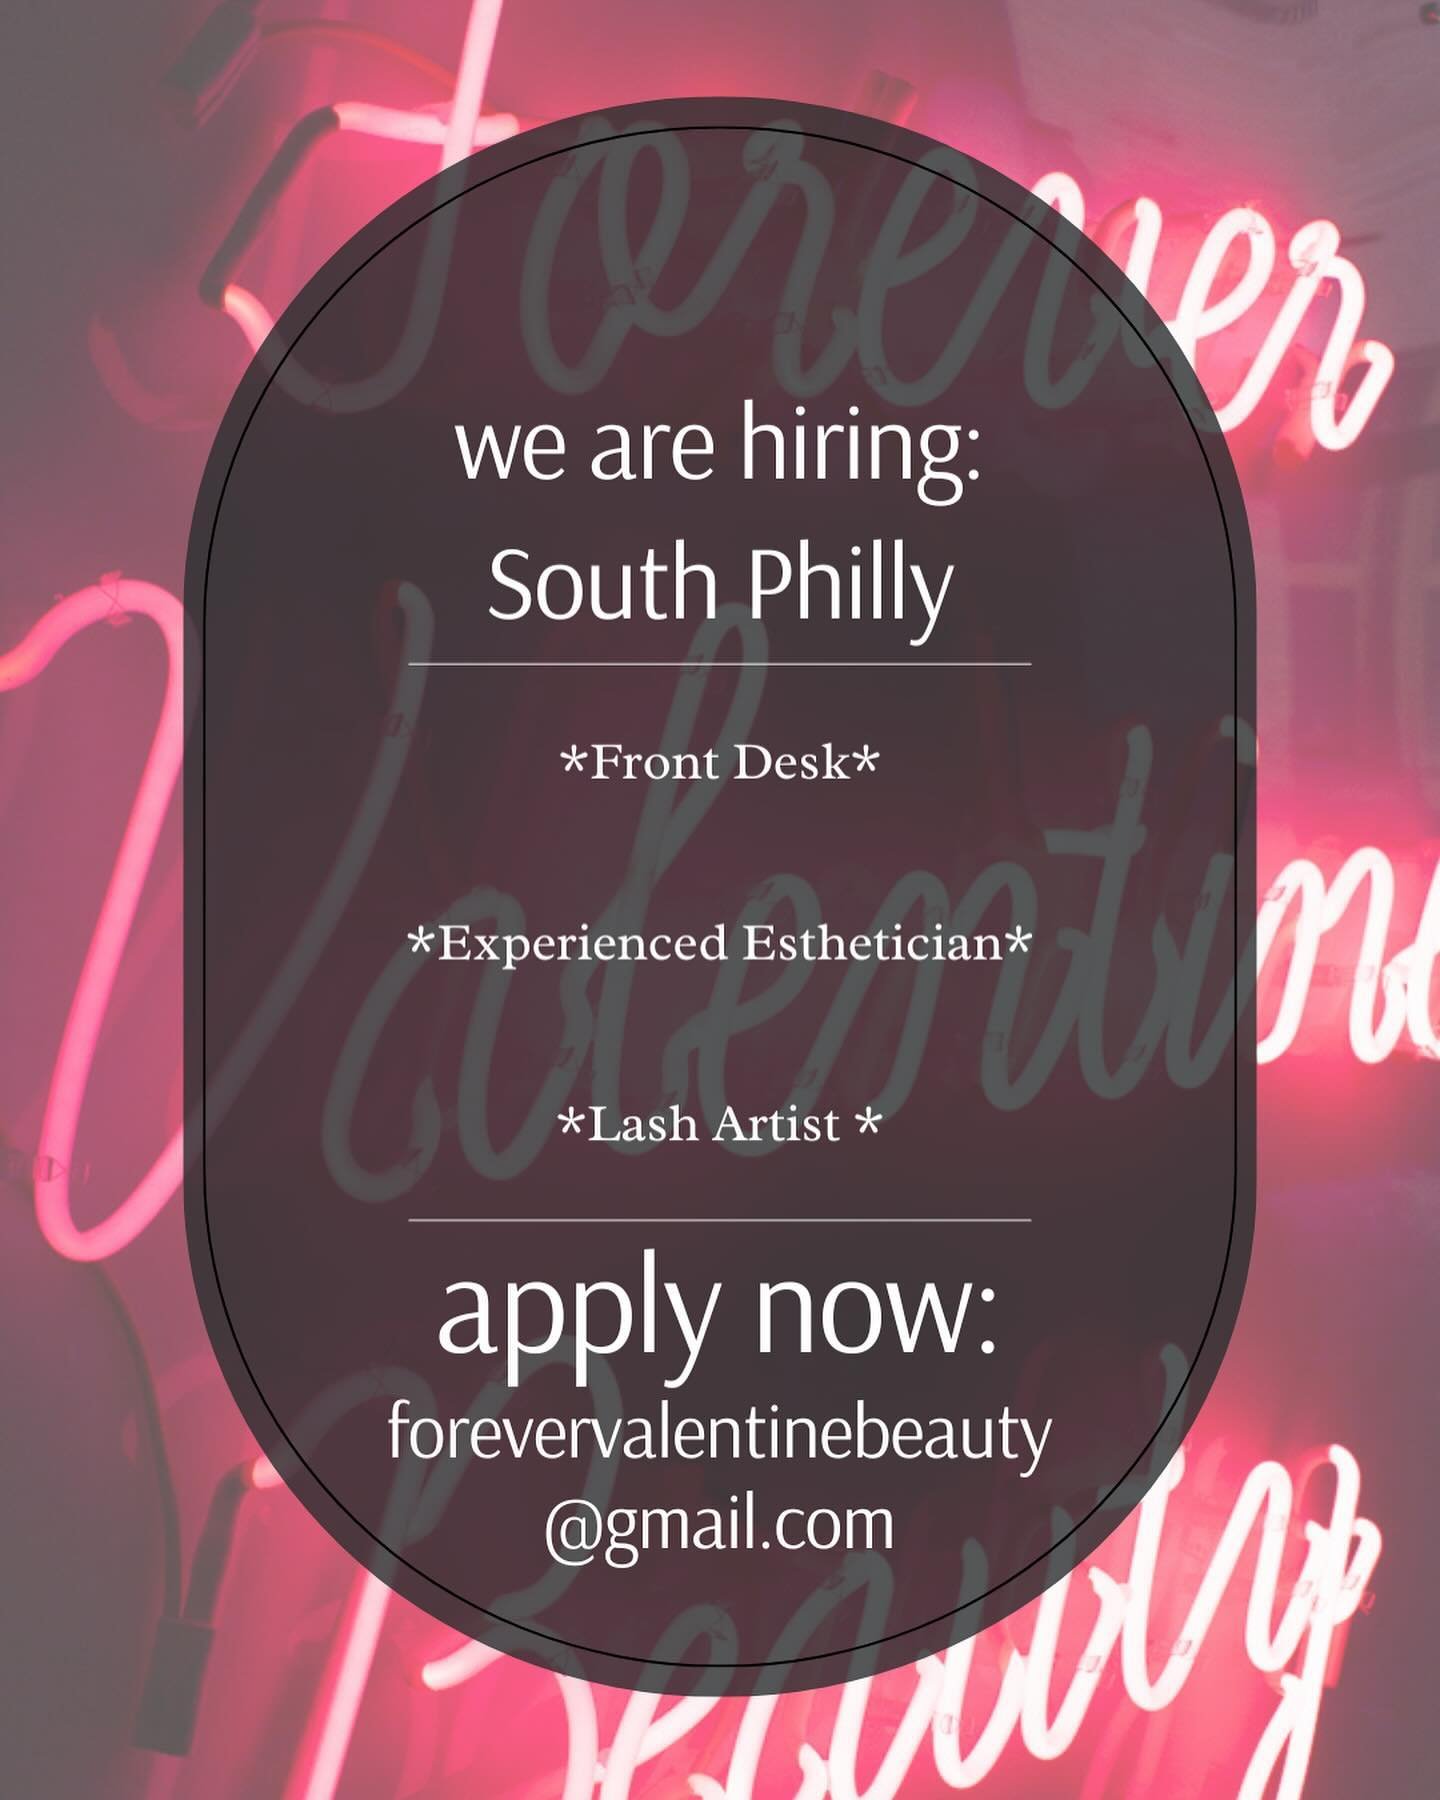 *Hiring*

Looking to grow our team a little more!!

If you think you are a good fit please email your resume (social @ also) to:

Forevervalentinebeauty@gmail.com